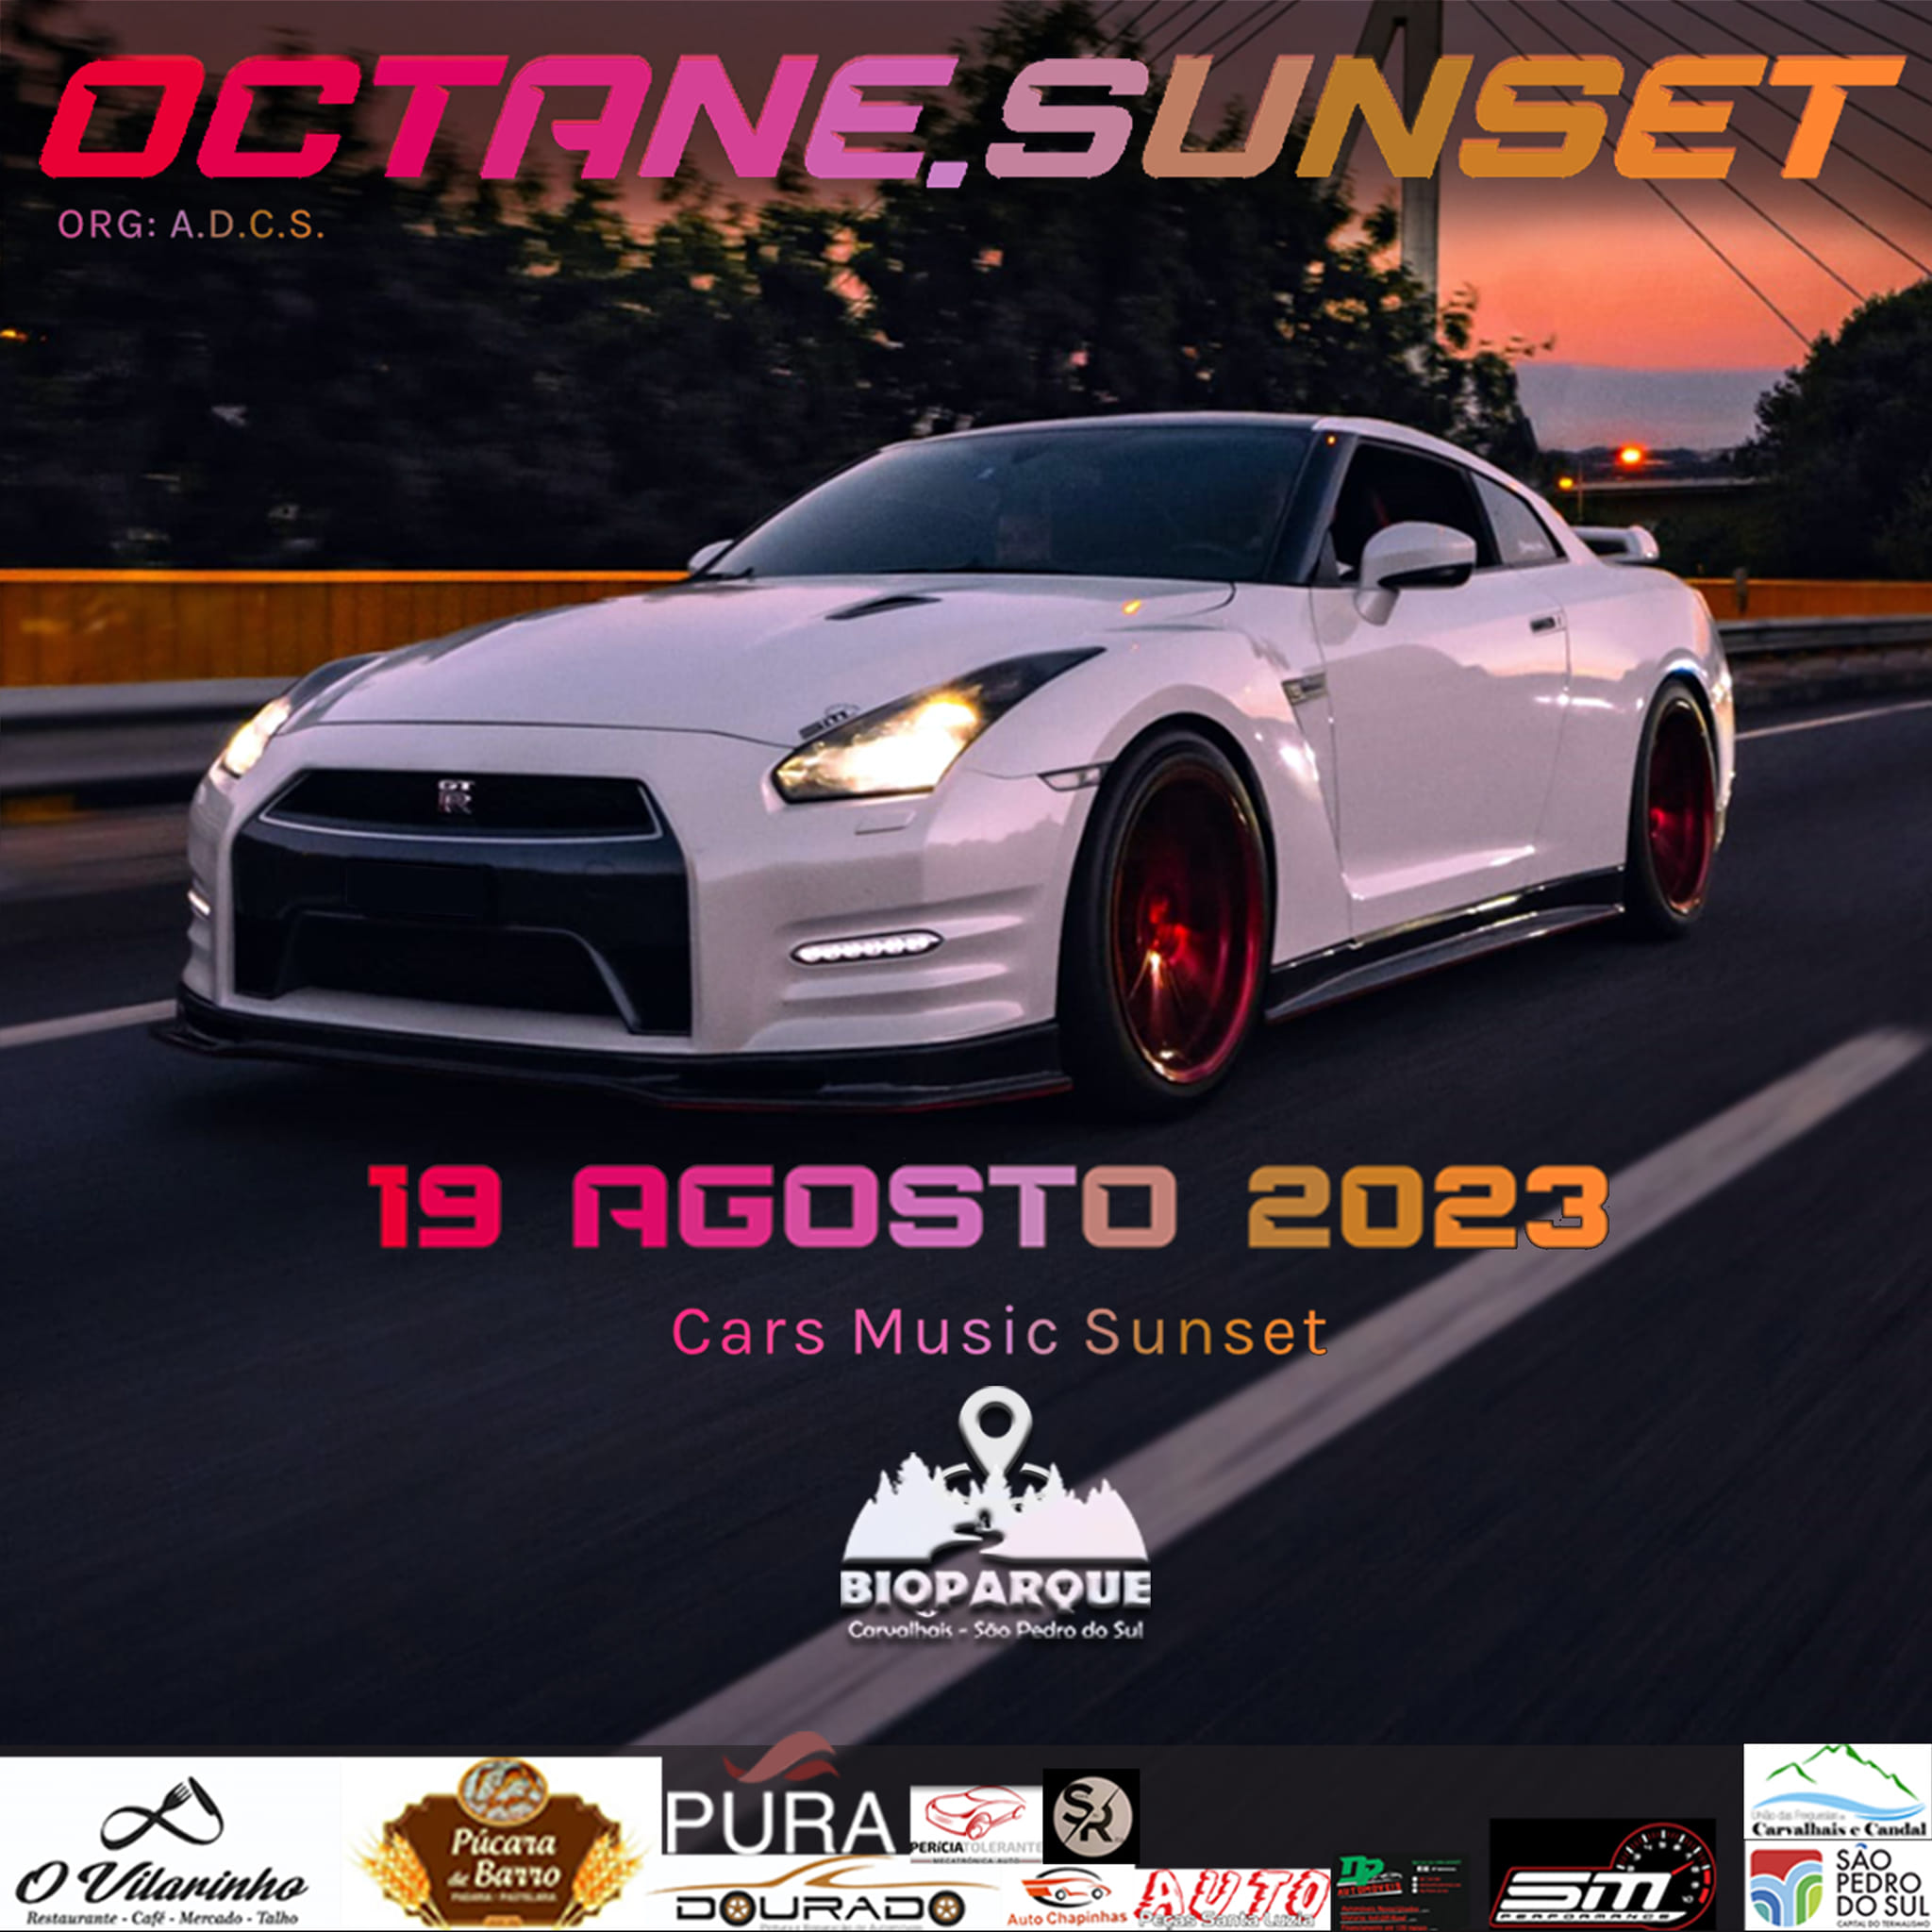 Read more about the article Octane Sunset 19 Agosto 2023